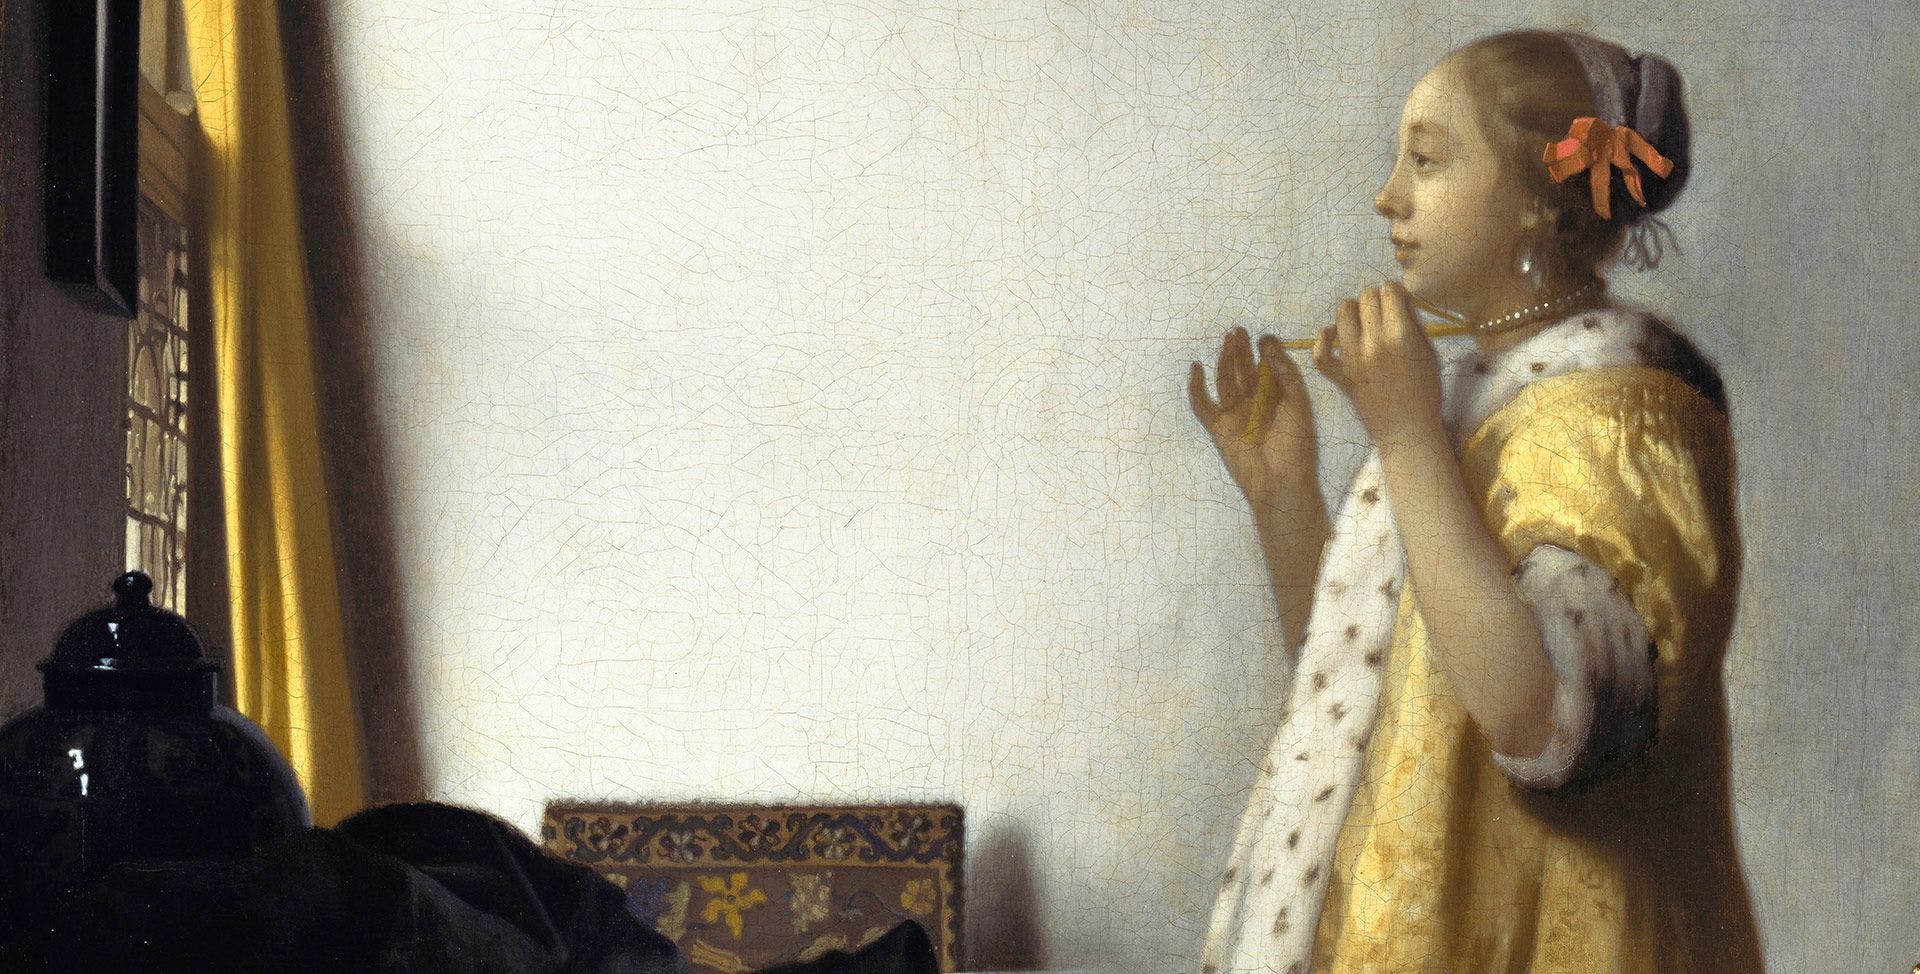 A detail from a painting by Johannes Vermeer, titled Young Woman with a Pearl Necklace, dated 1664.